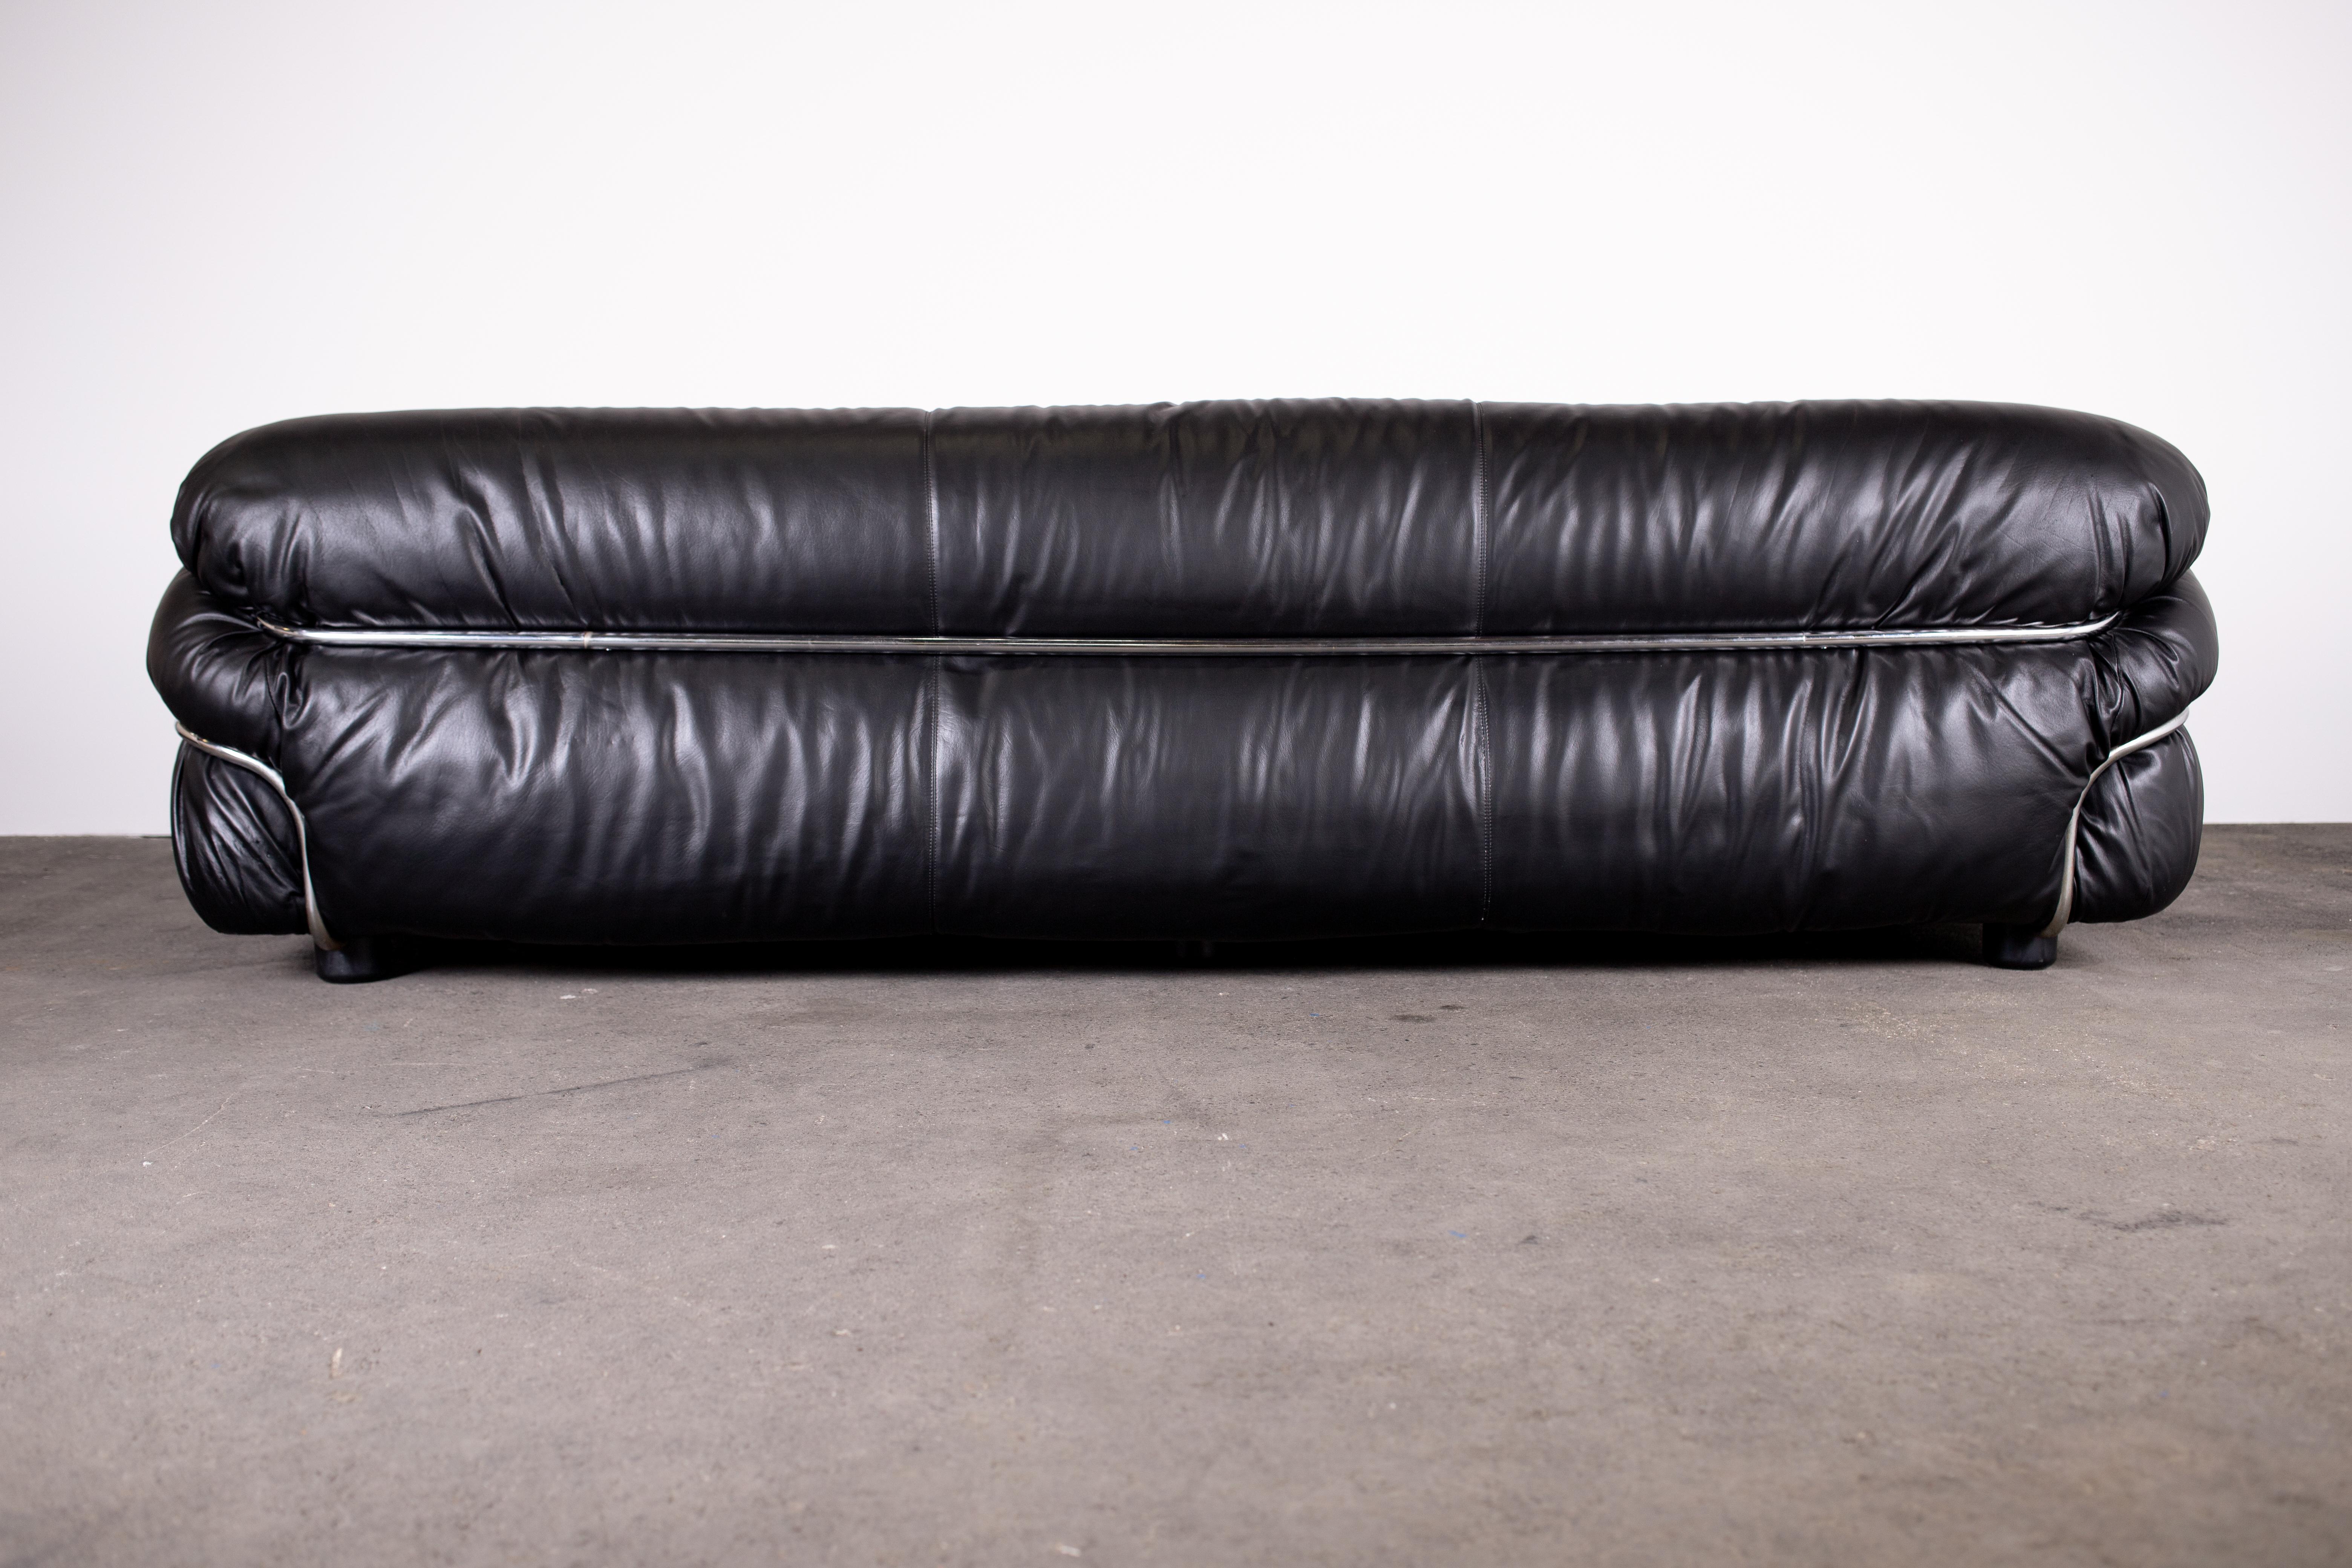 Late 20th Century 1970s XL Sesann Sofa by Gianfranco Frattini for Cassina in Black Leather